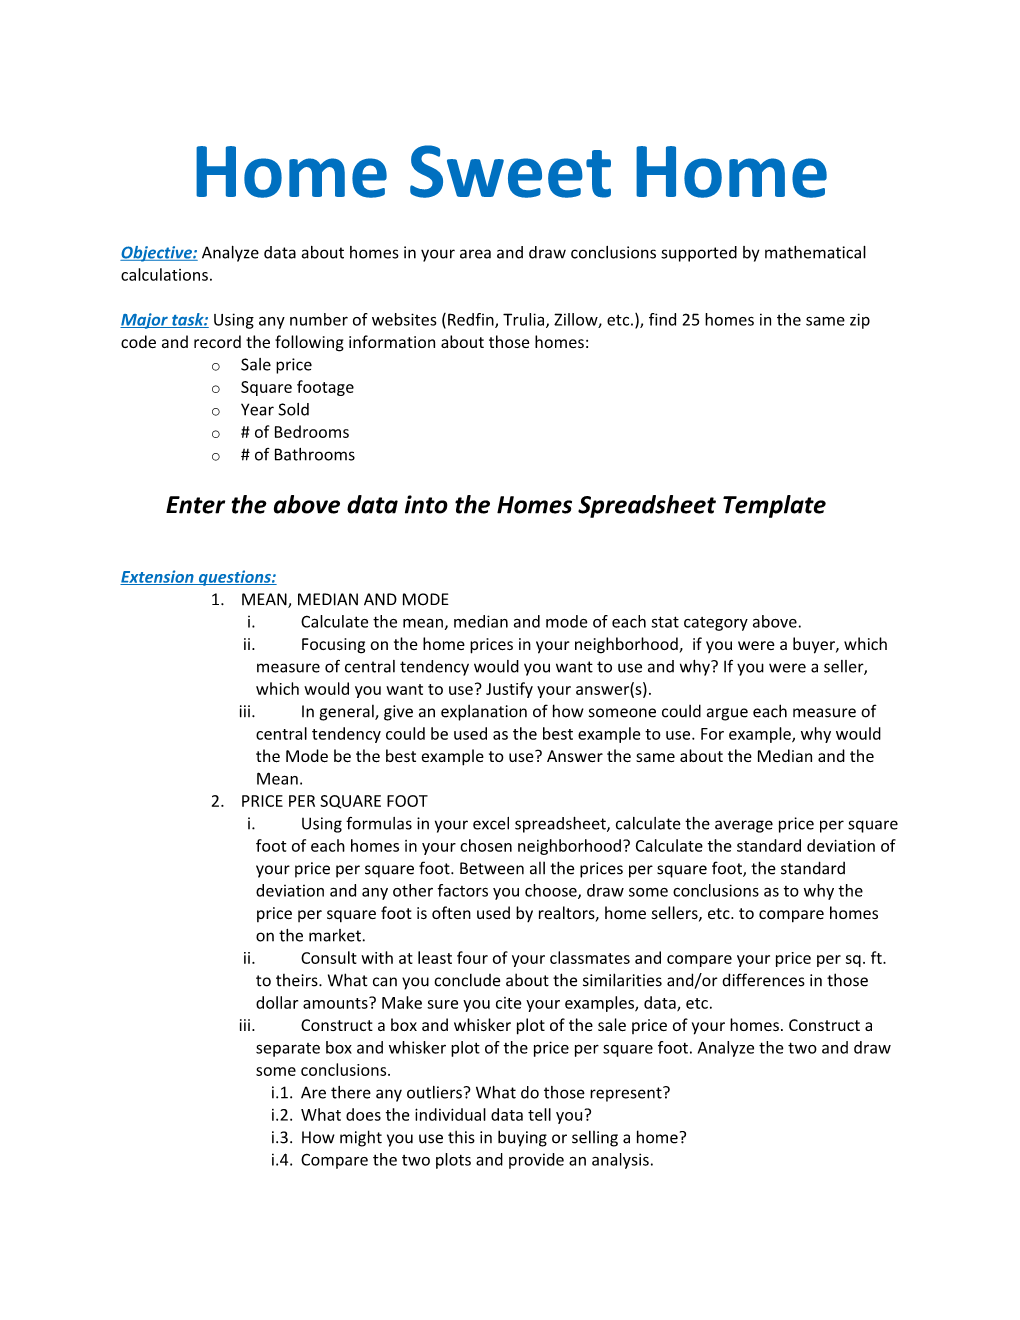 Enter the Above Data Into the Homes Spreadsheet Template